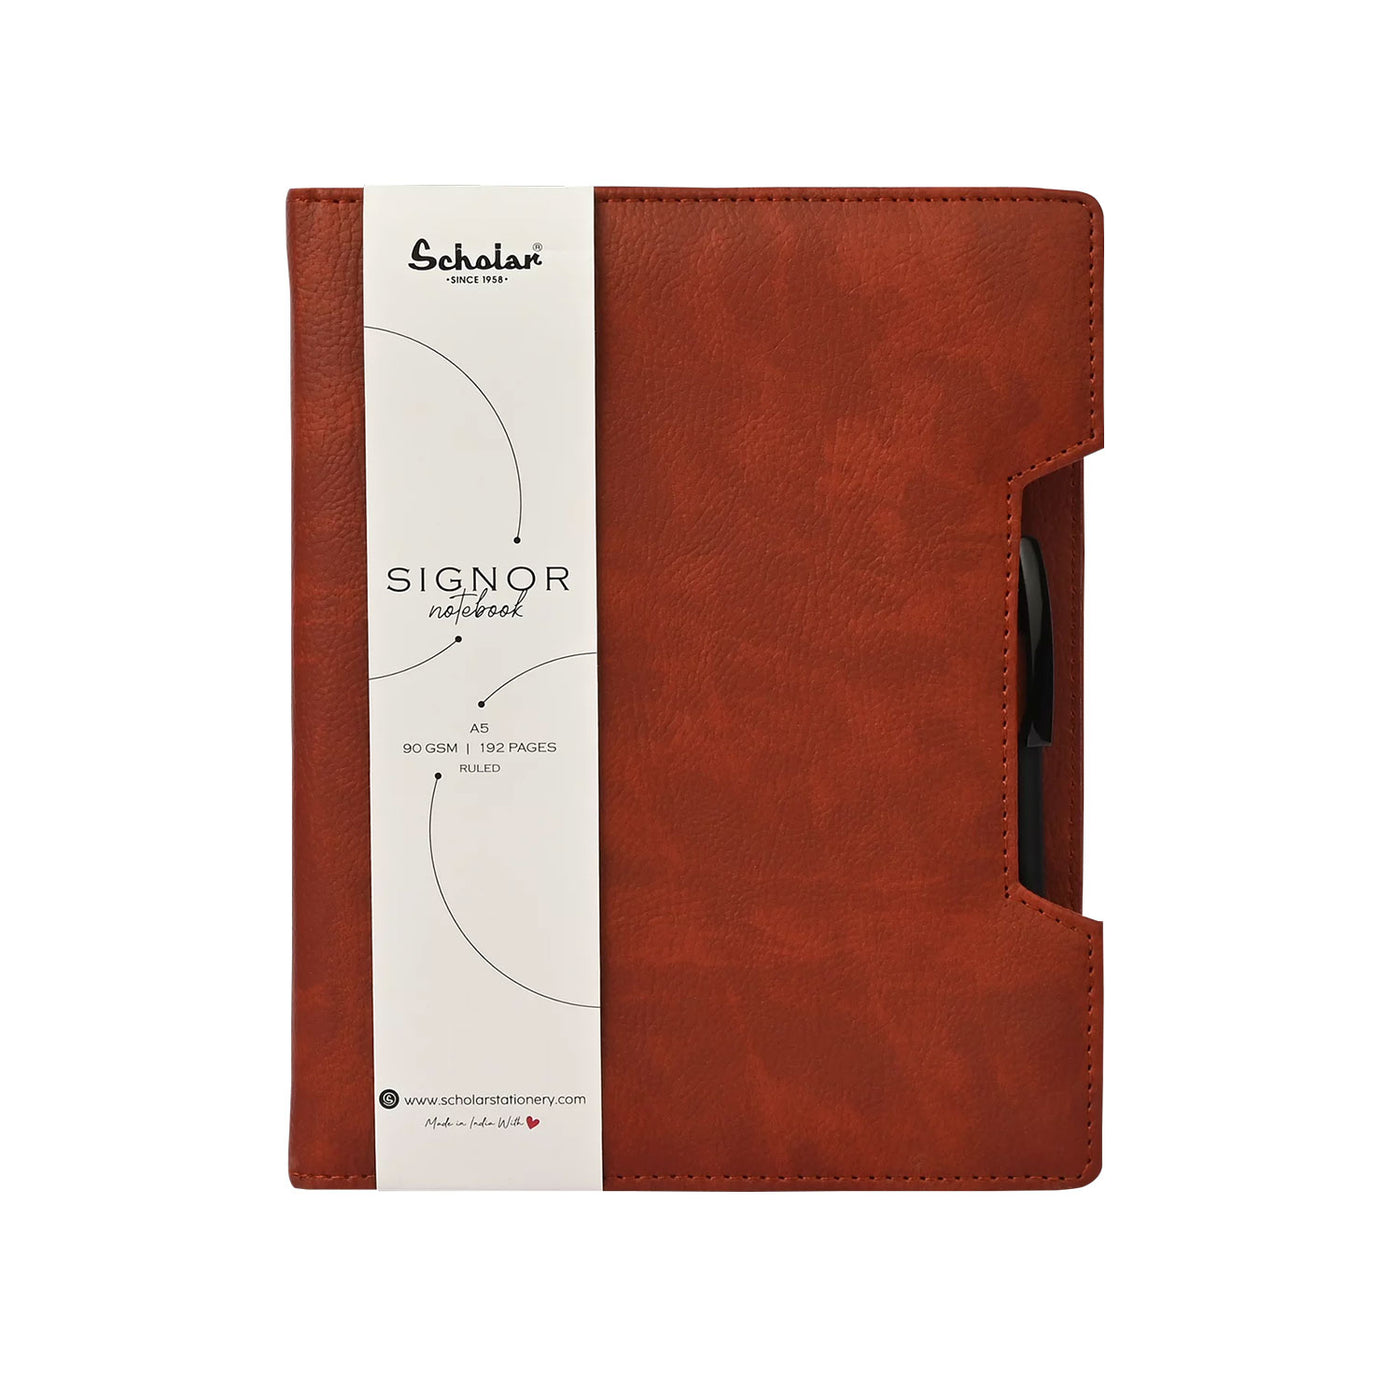 Scholar Signor Maroon Notebook - A5 Ruled 1